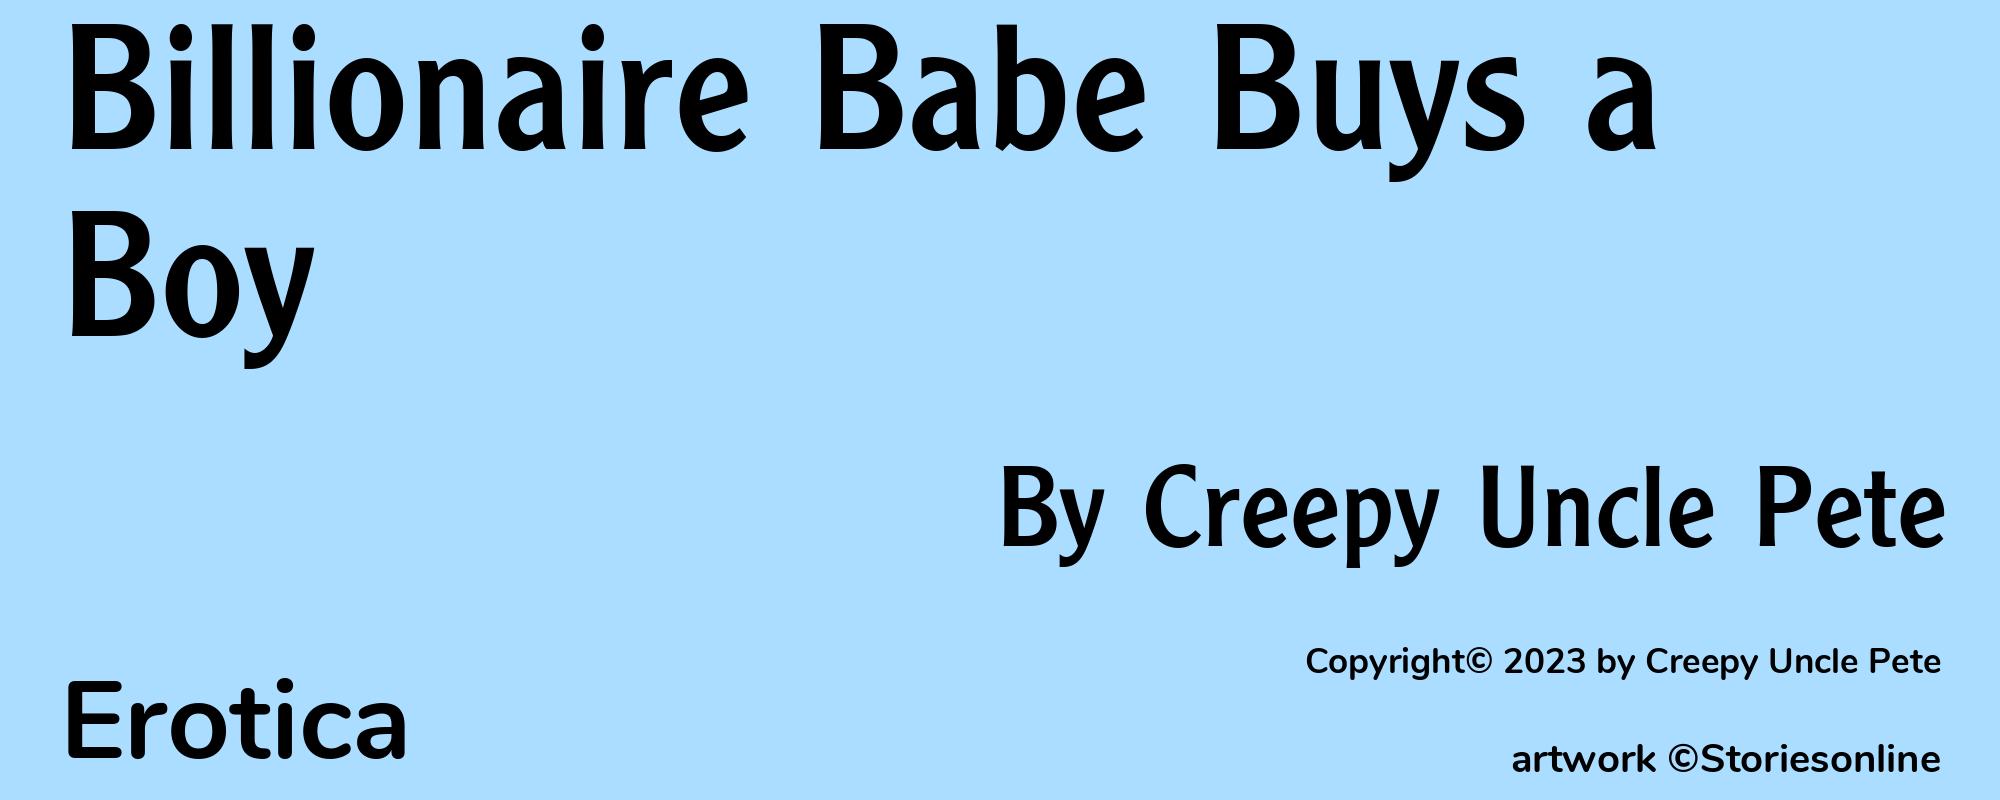 Billionaire Babe Buys a Boy - Cover